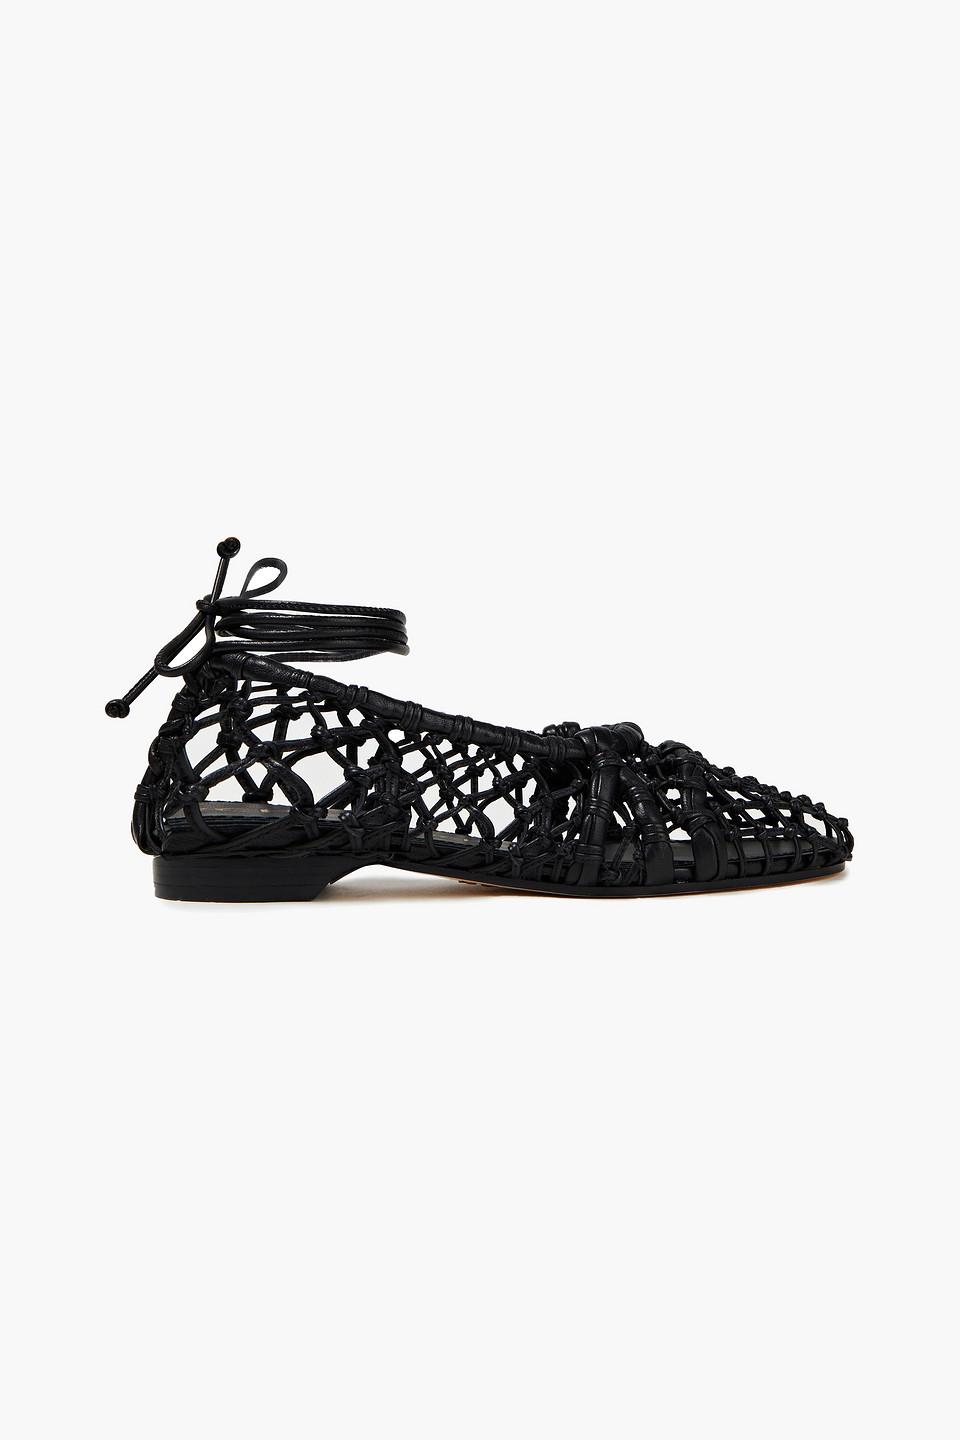 Tory Burch Helena Knotted Leather Ballet Flats in Black | Lyst Australia